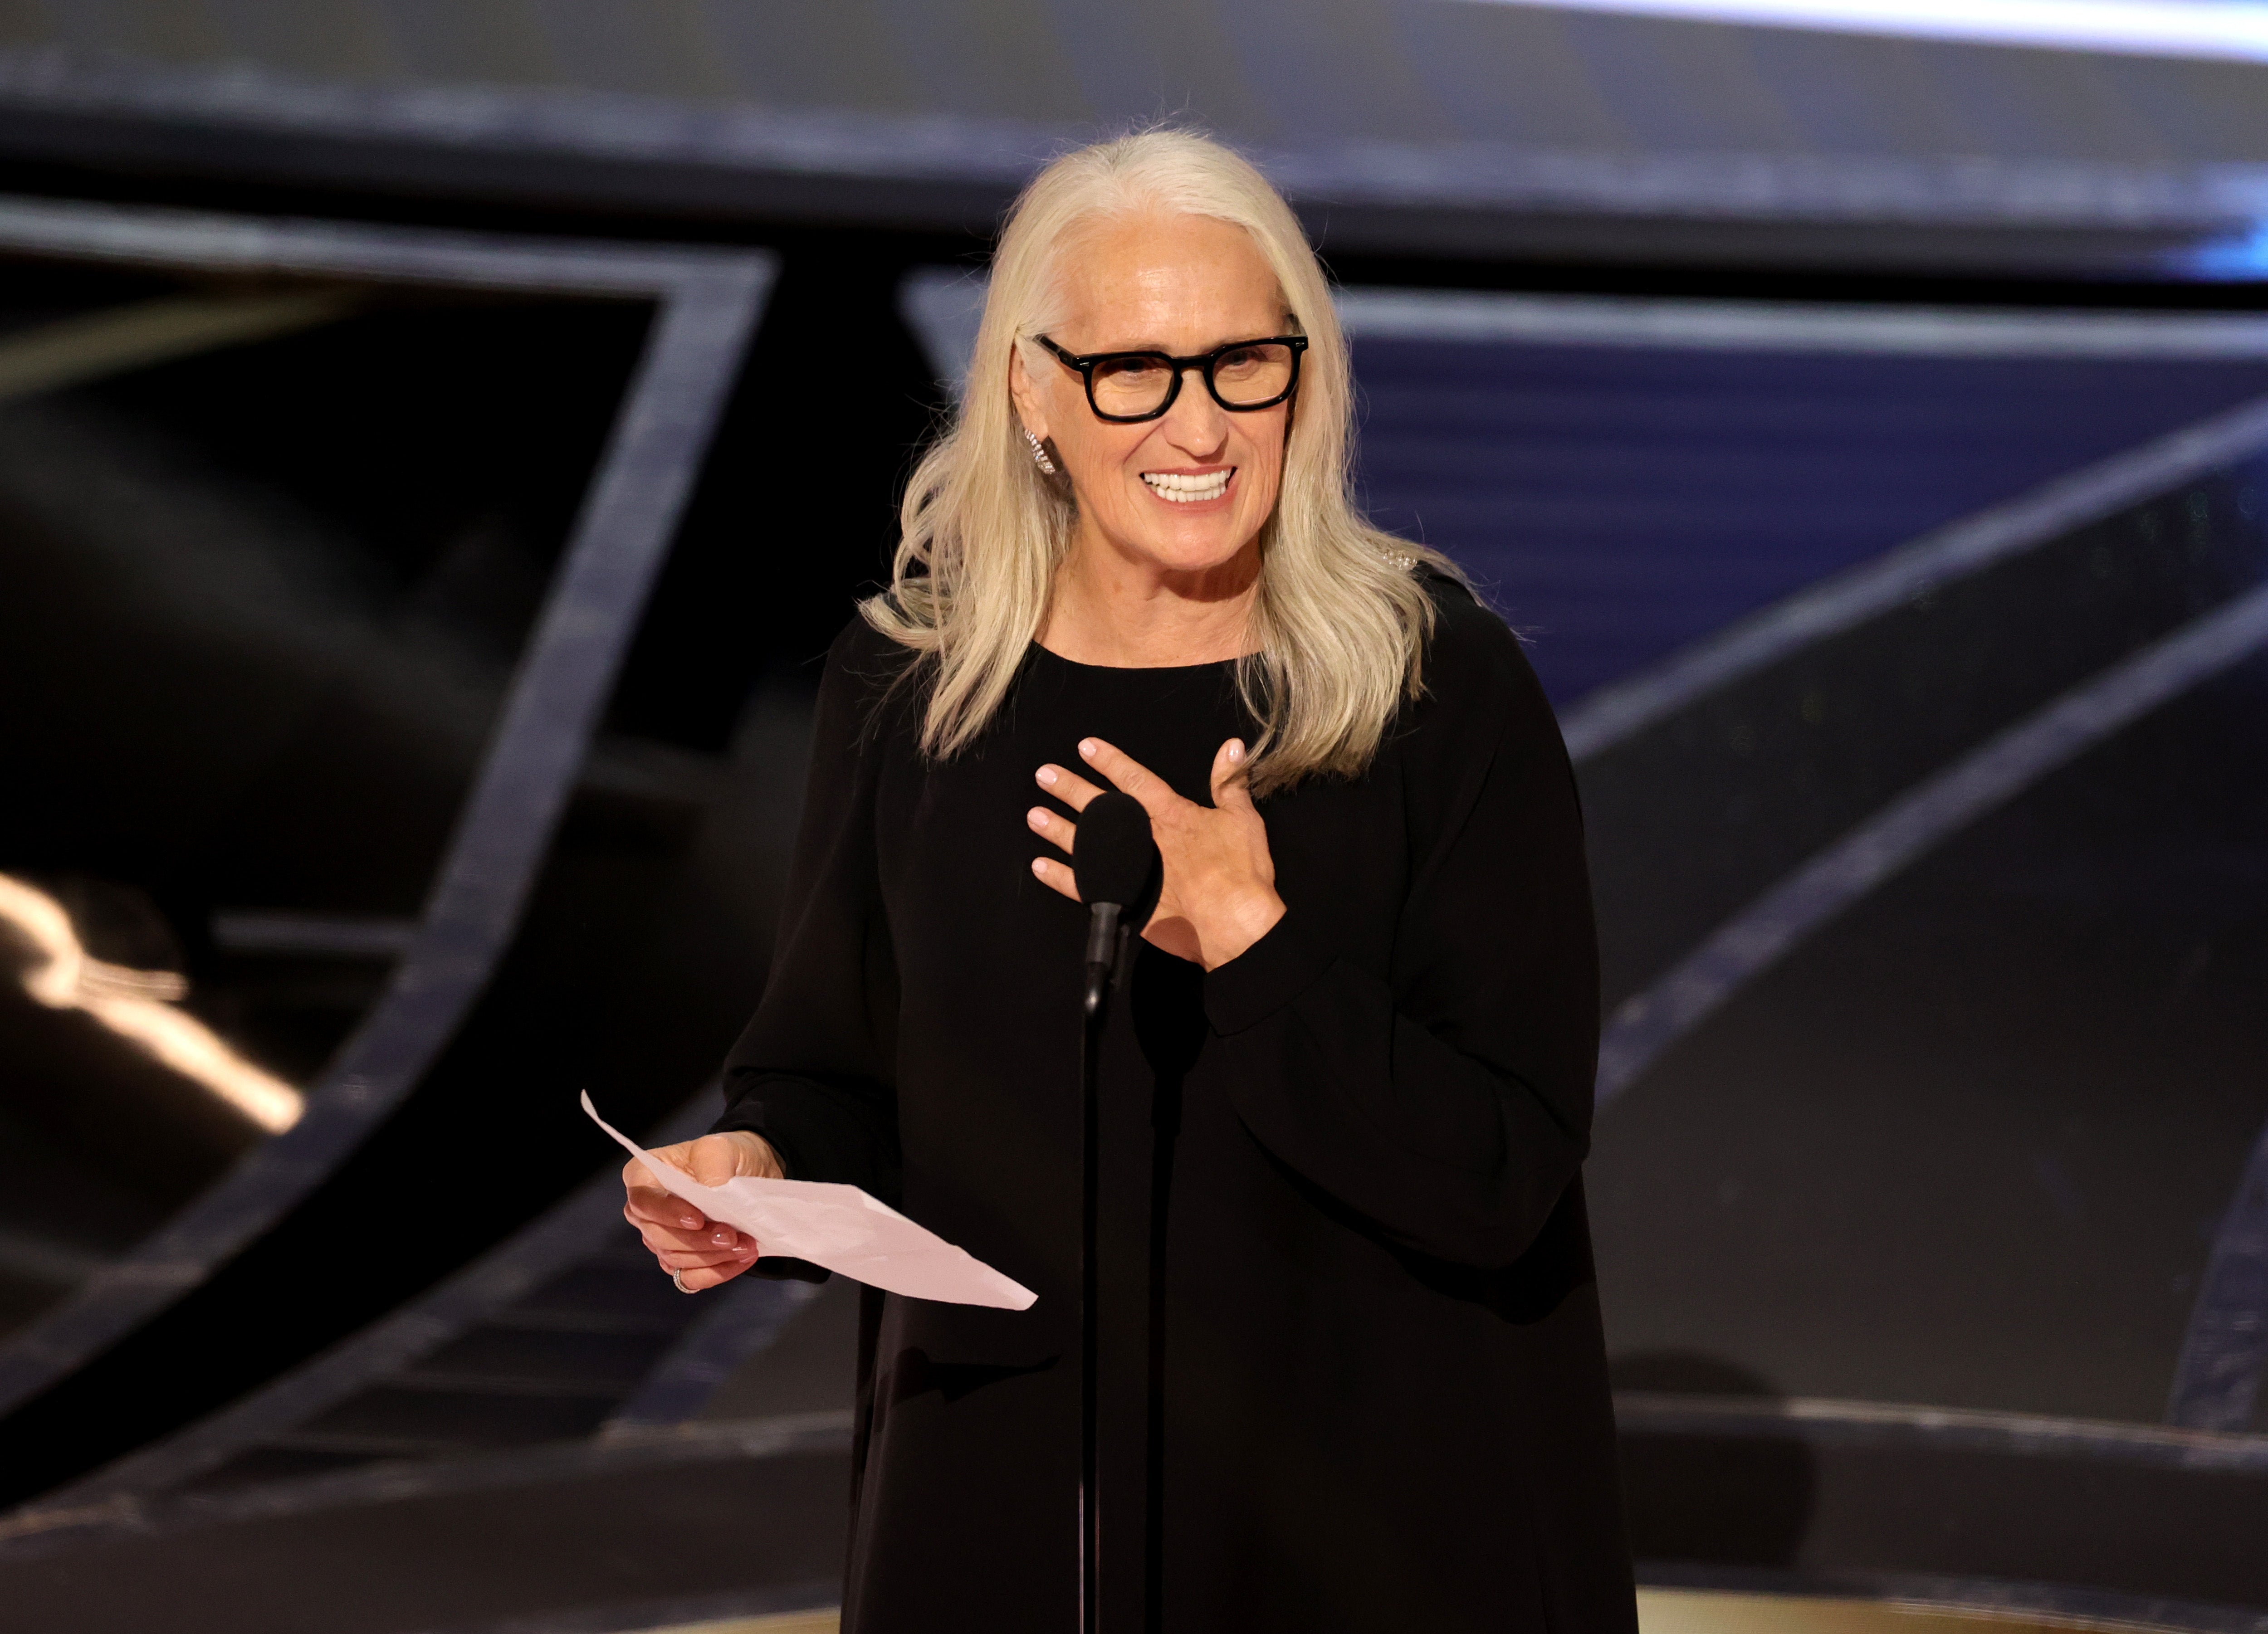 Jane Campion won the Best Director Oscar for ‘The Power of the Dog’ on 27 March